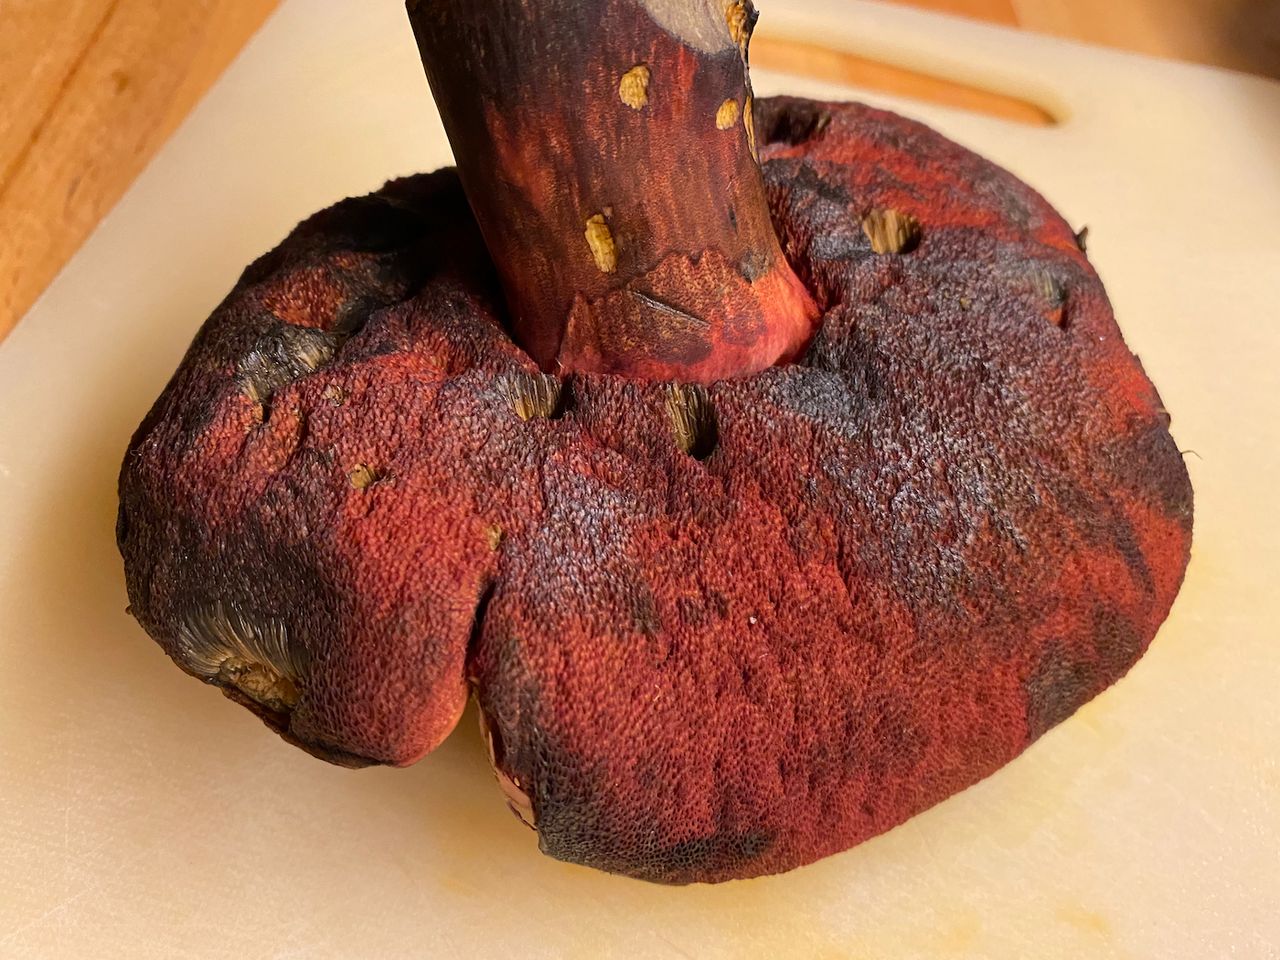 An intense red mushroom laying on its cap so that the deep red pores are exposed.